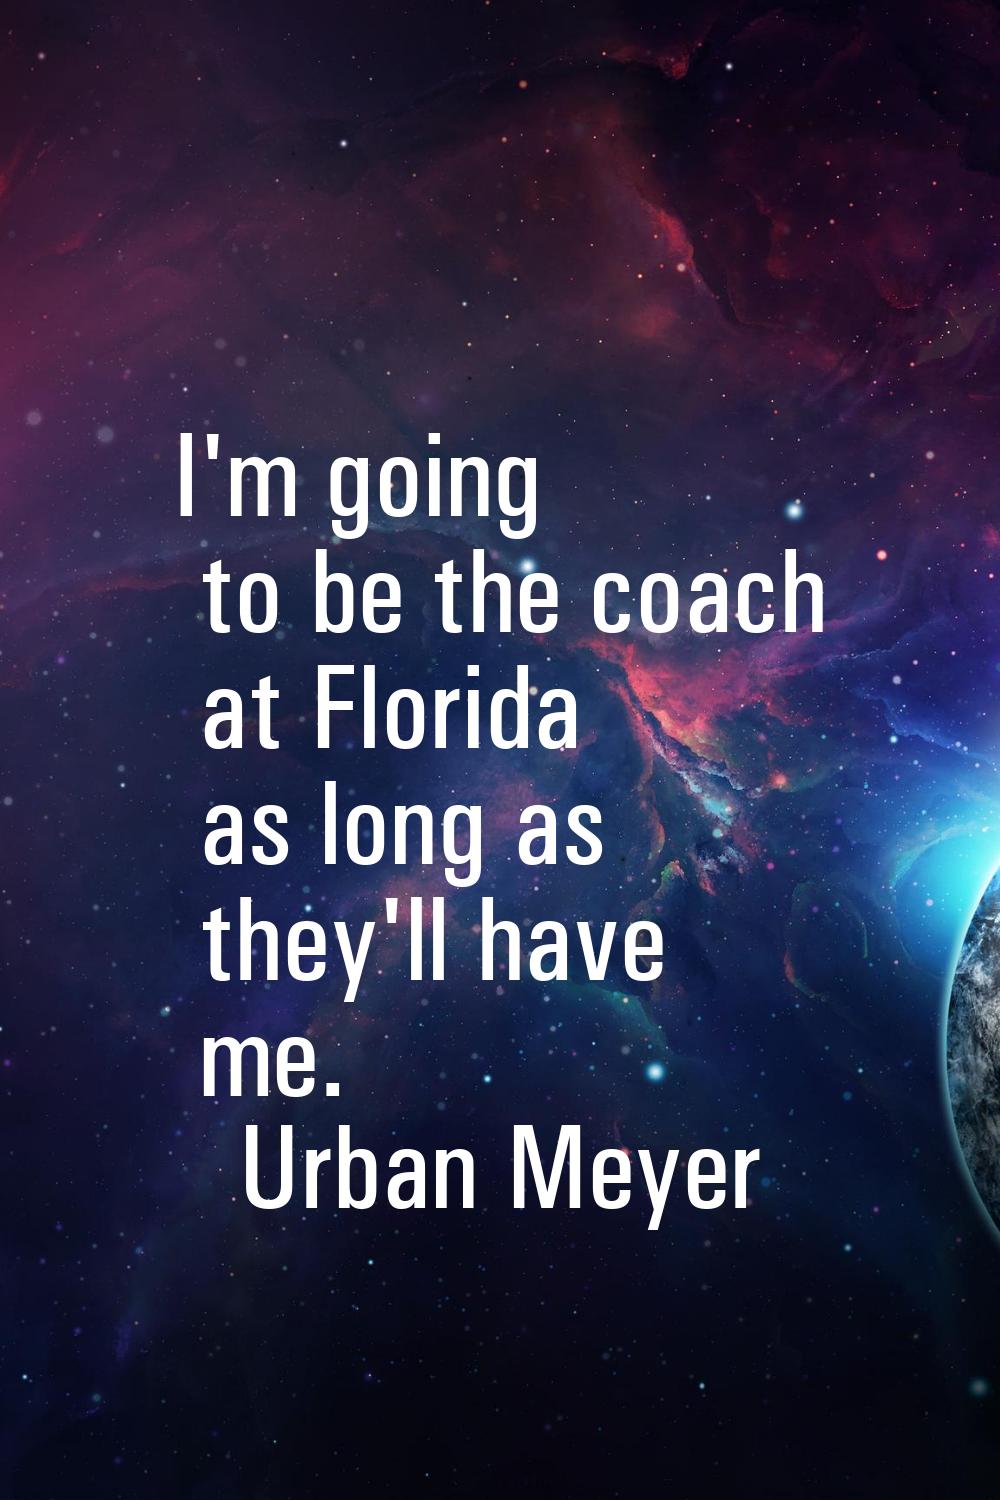 I'm going to be the coach at Florida as long as they'll have me.